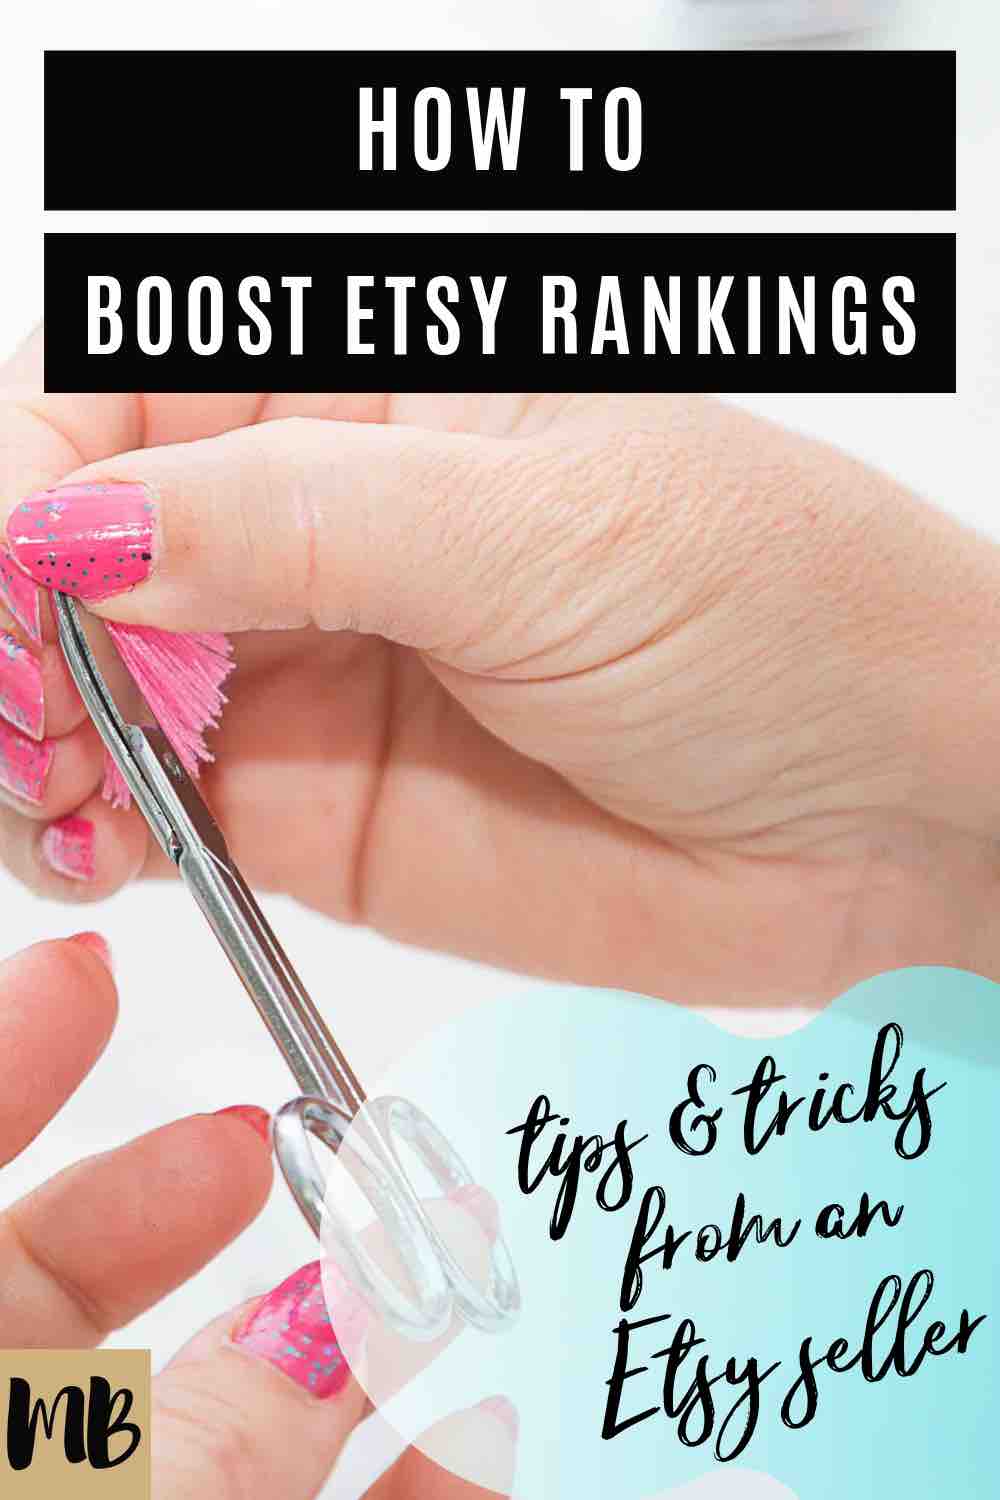 boost etsy ranking tips and tricks